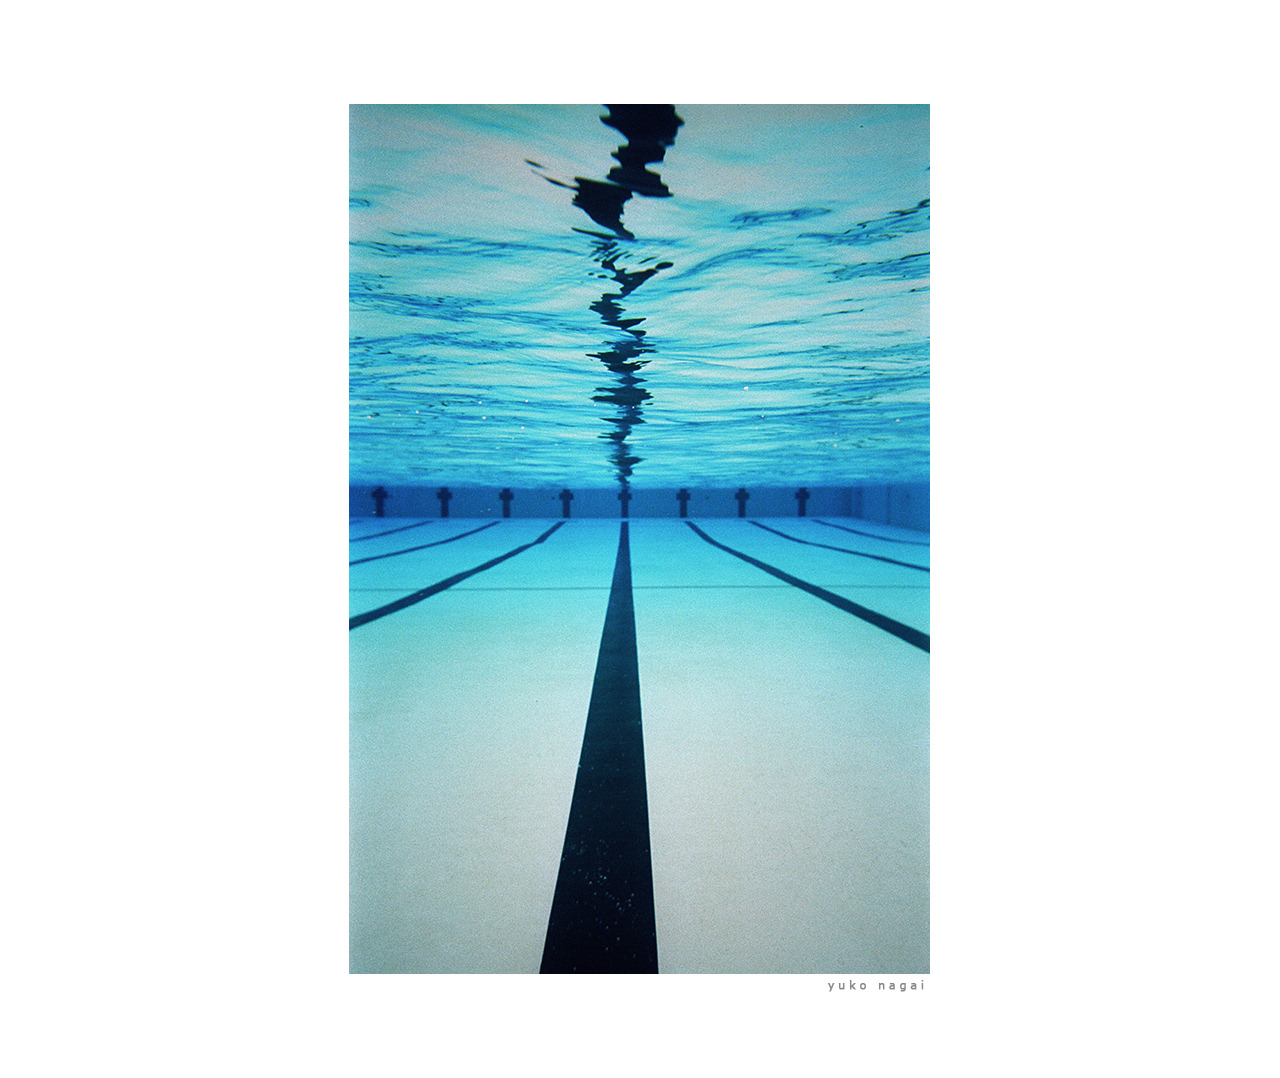 Abstract image of a swimming pool.